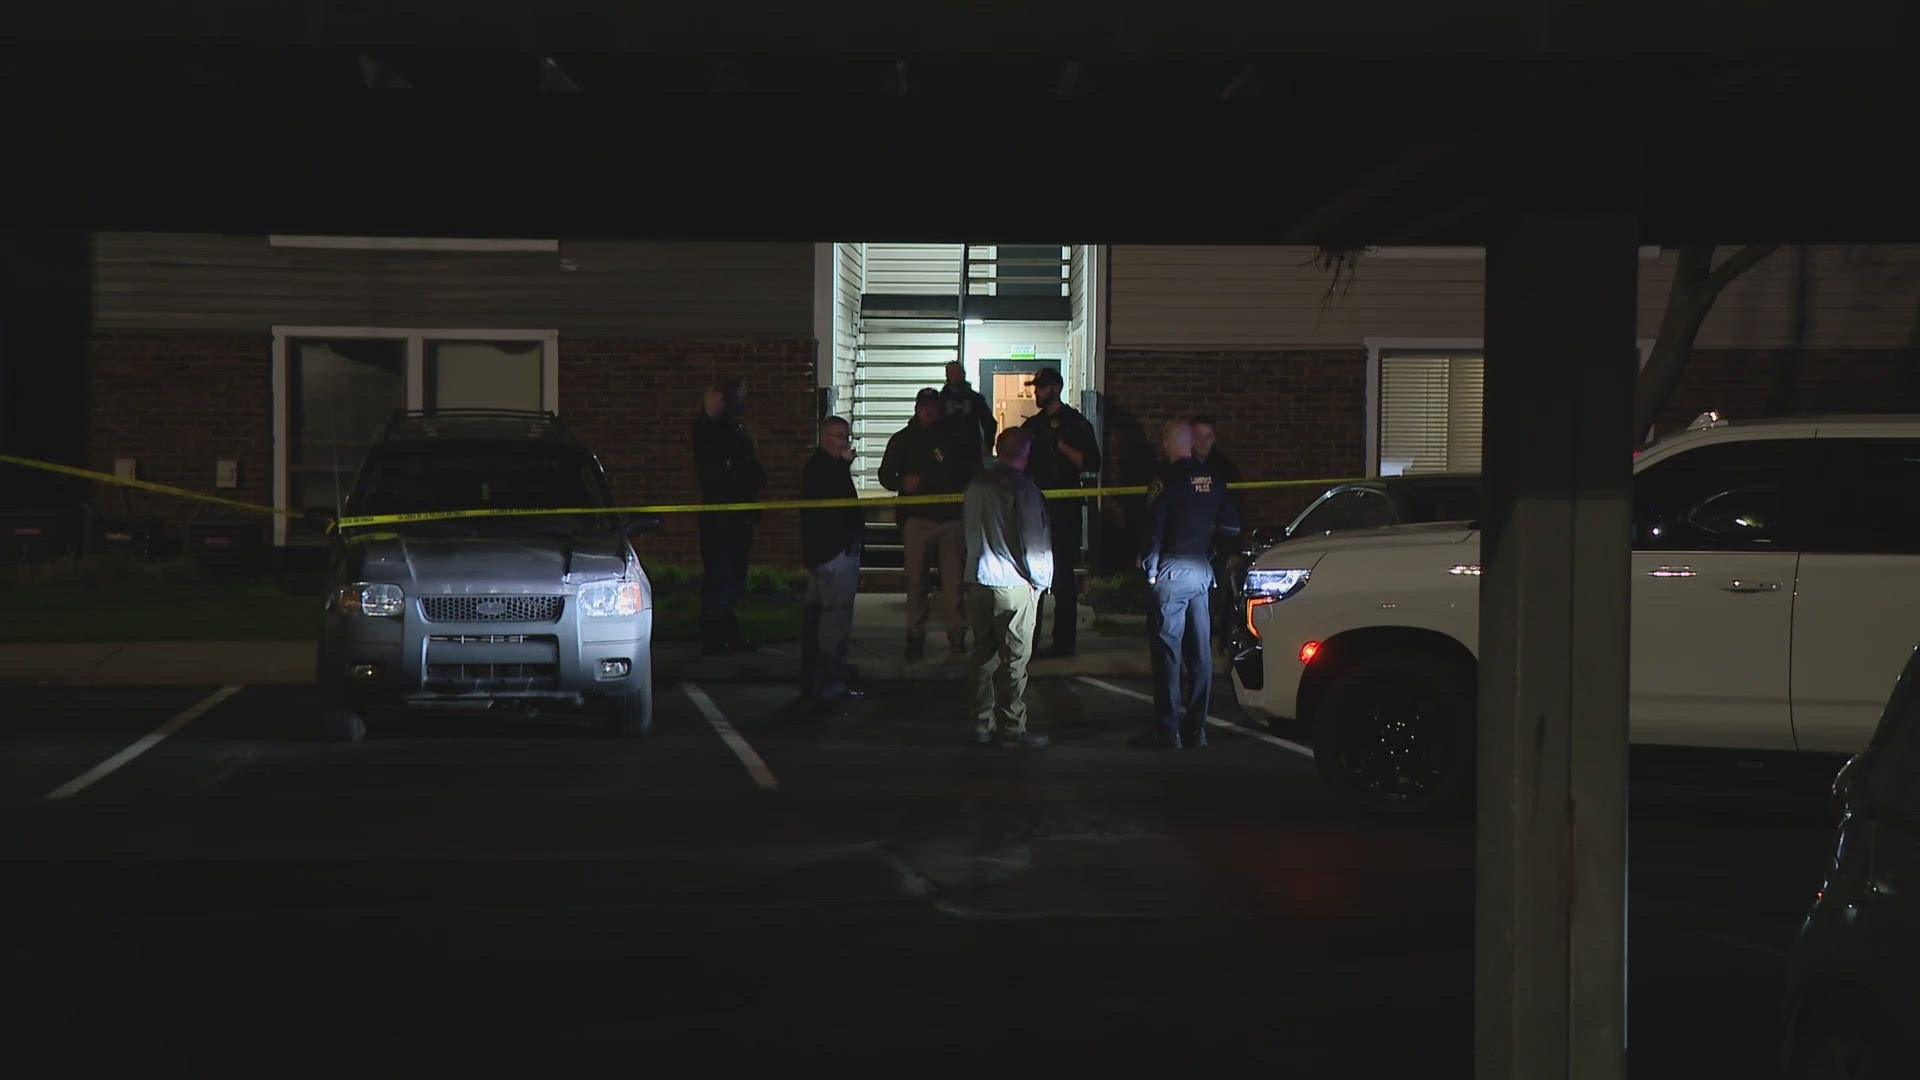 The shooting happened at an apartment in the 7000 block of McIntosh Lane, near East 56th Street and I-465, at around 9 p.m.